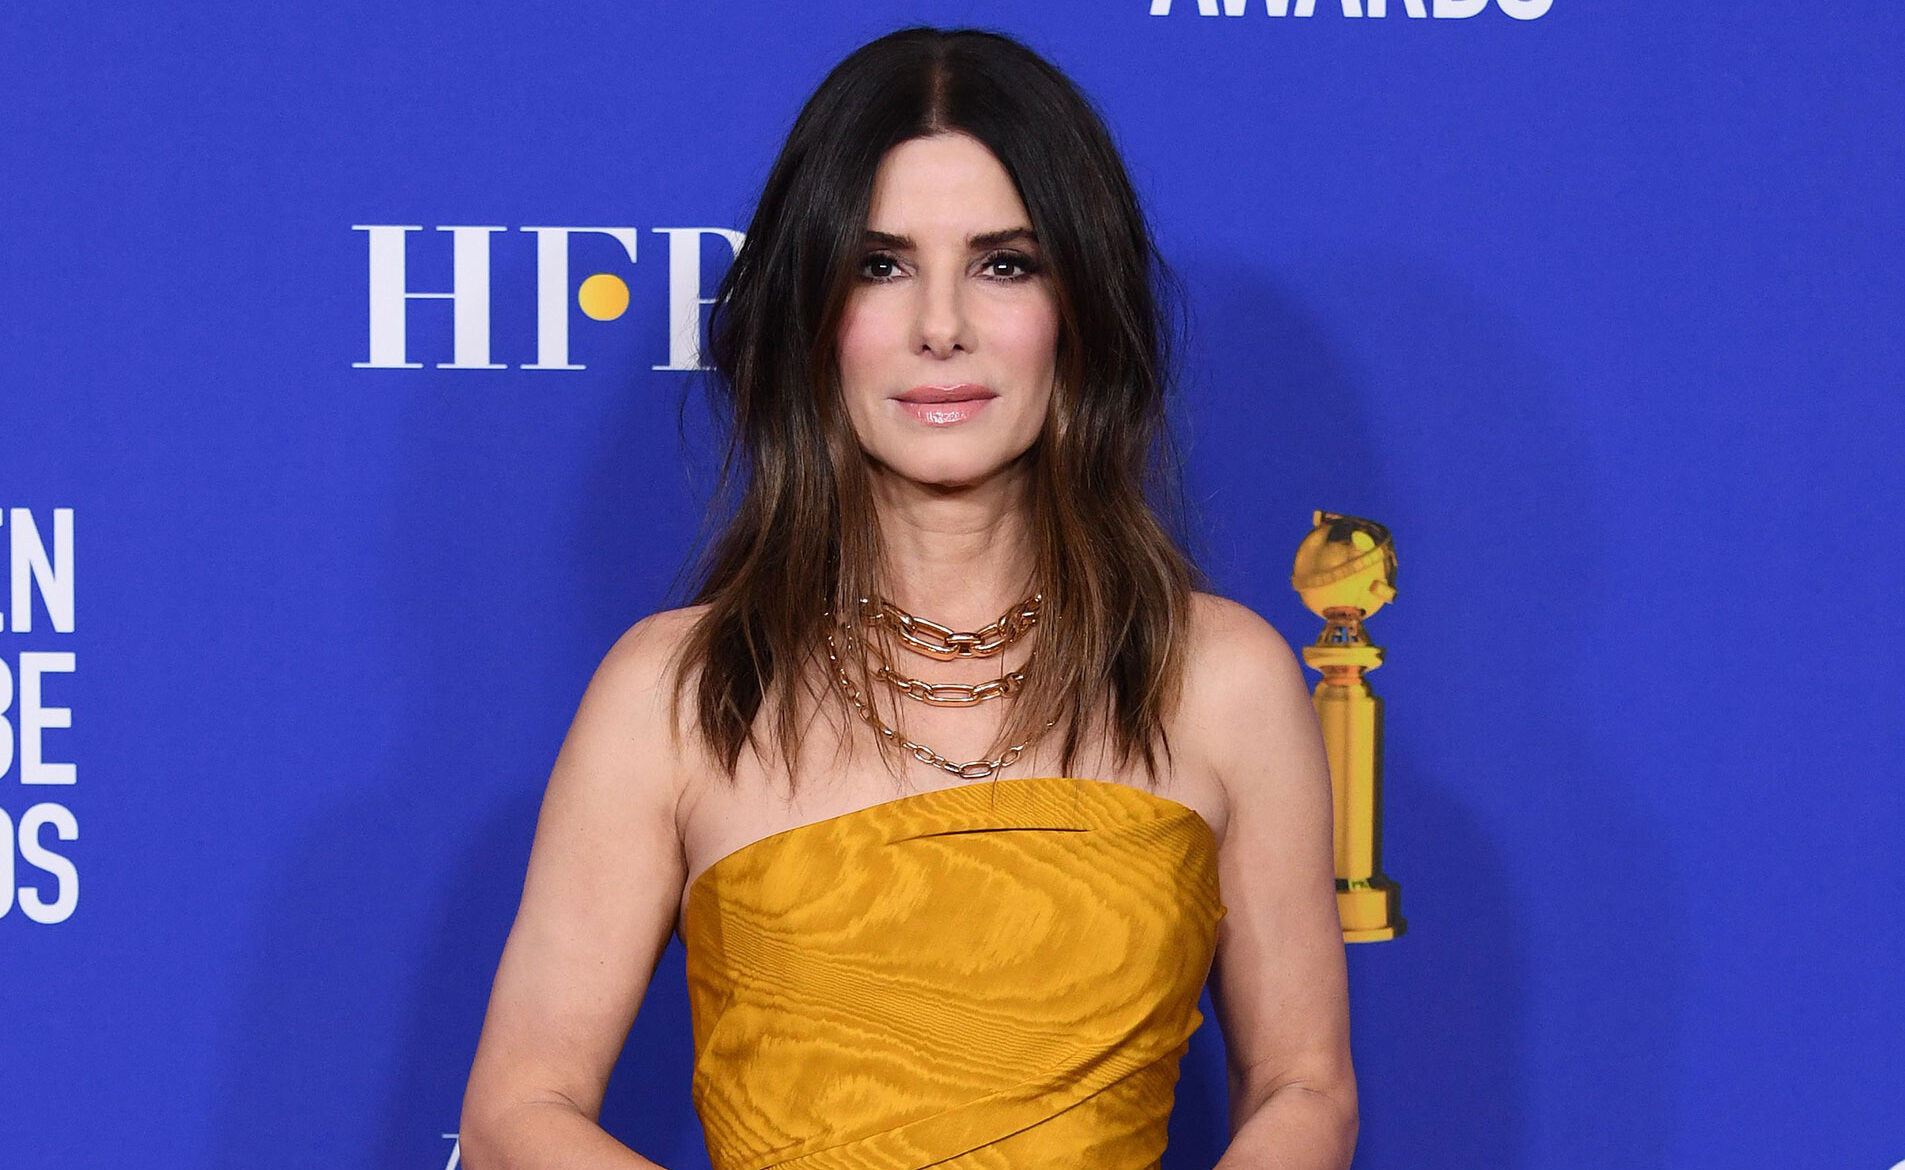 Sandra Bullock Opens Up About Her Partner and Children